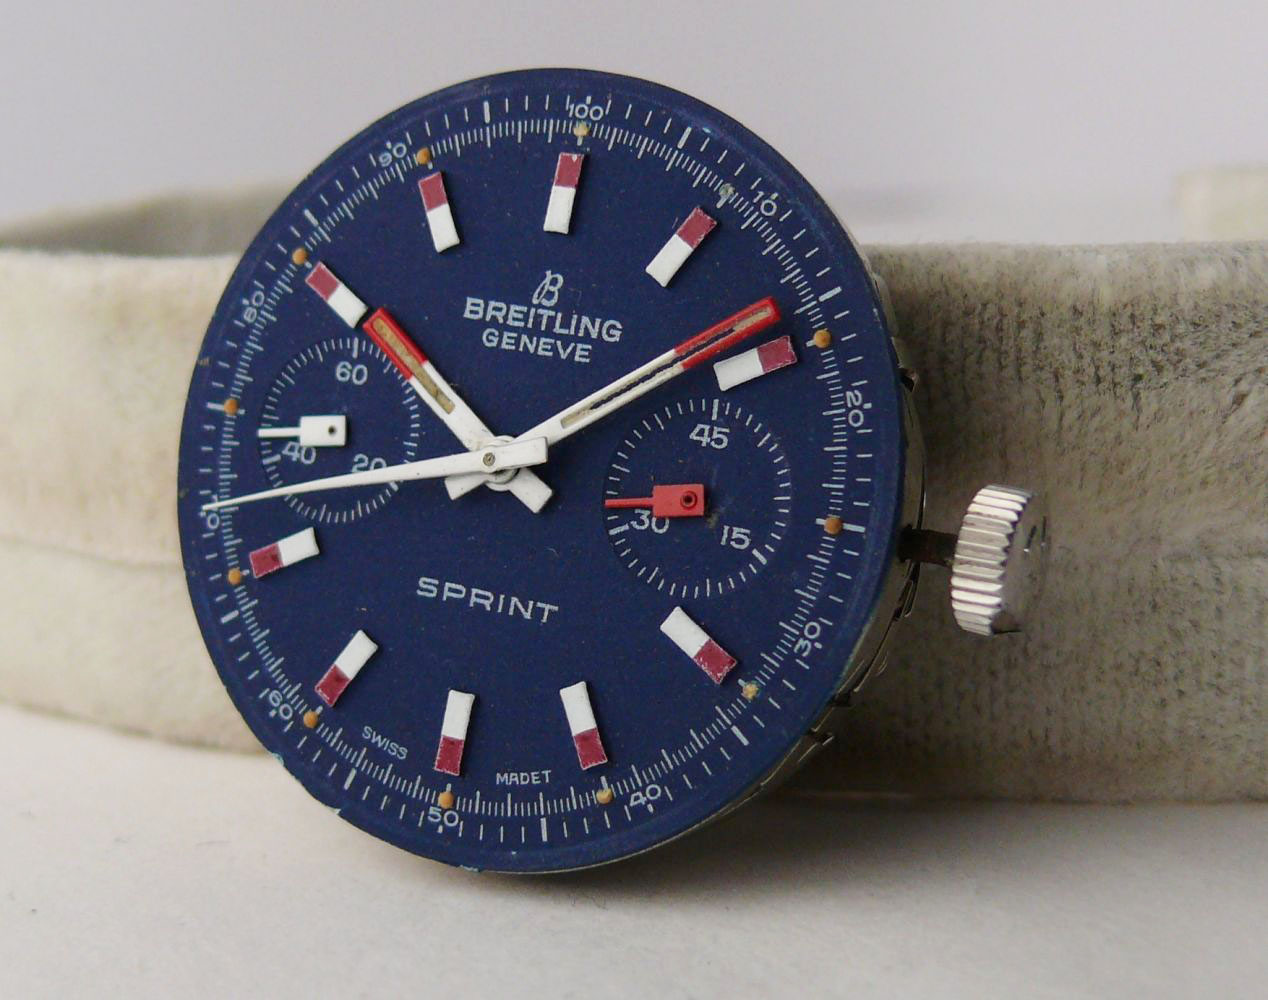 1960s Vintage Gents Breitling Sprint 7733, vintage breitling sprint from the 1960s/1970s, clean dial - Image 2 of 7